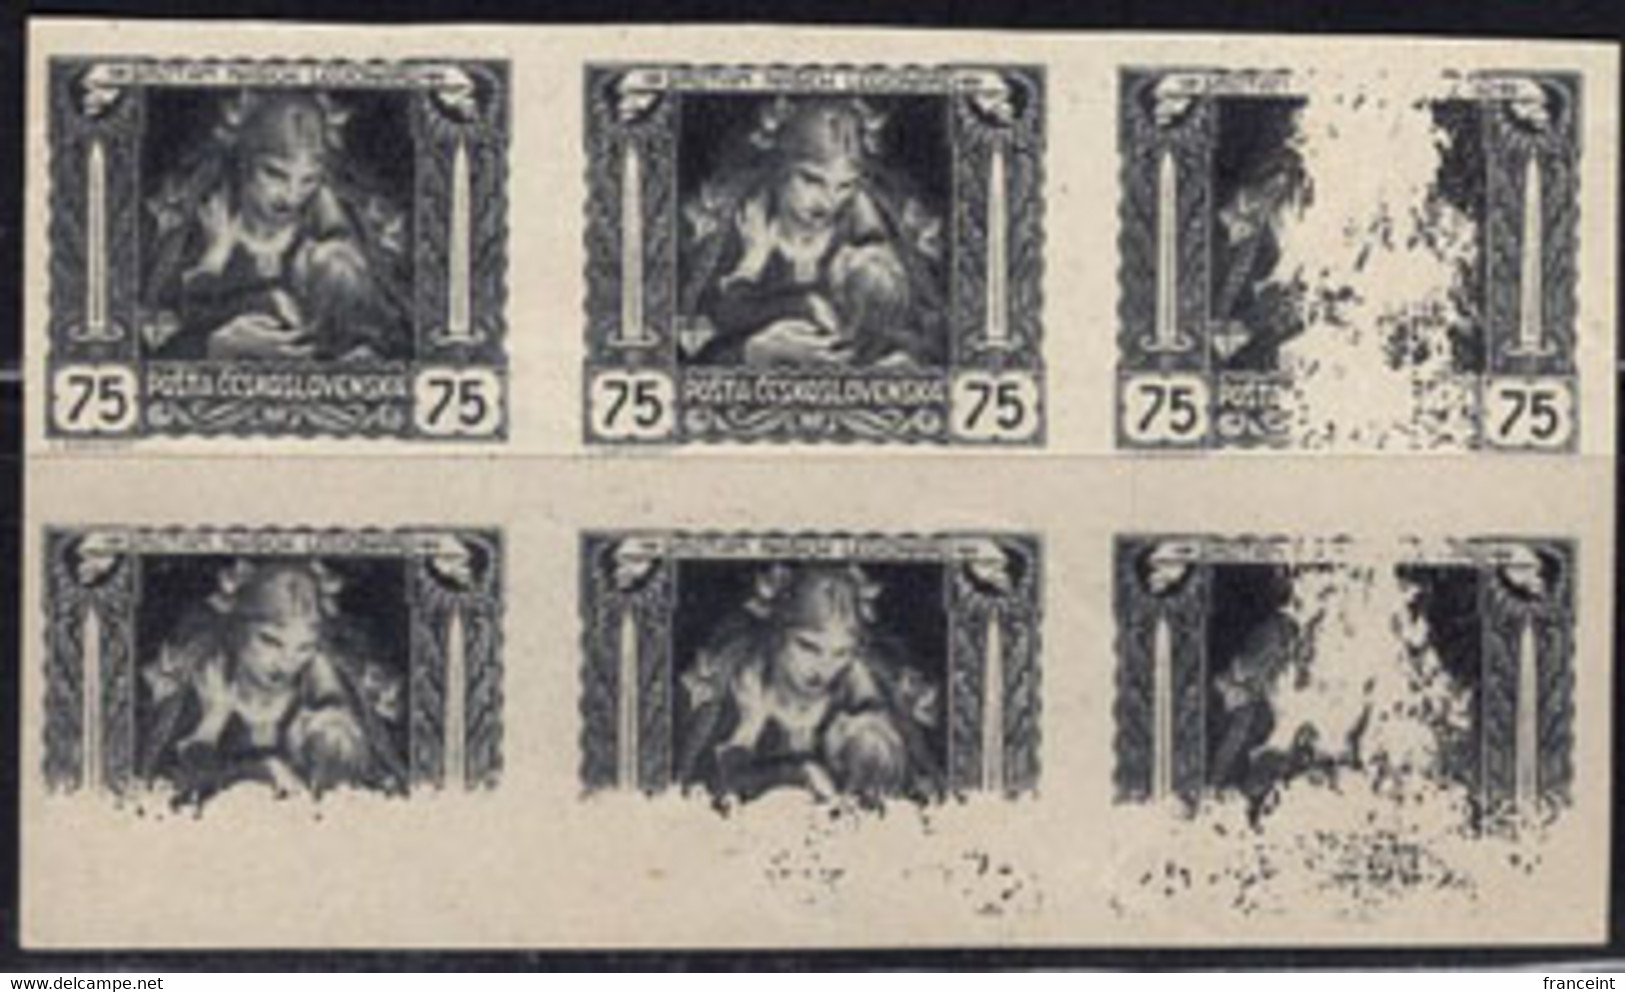 CZECHOSLOVAKIA(1919) Mother And Child. Block Of 6 Imperforate Proofs Printed On White Paper. Scott No B127. - Proofs & Reprints